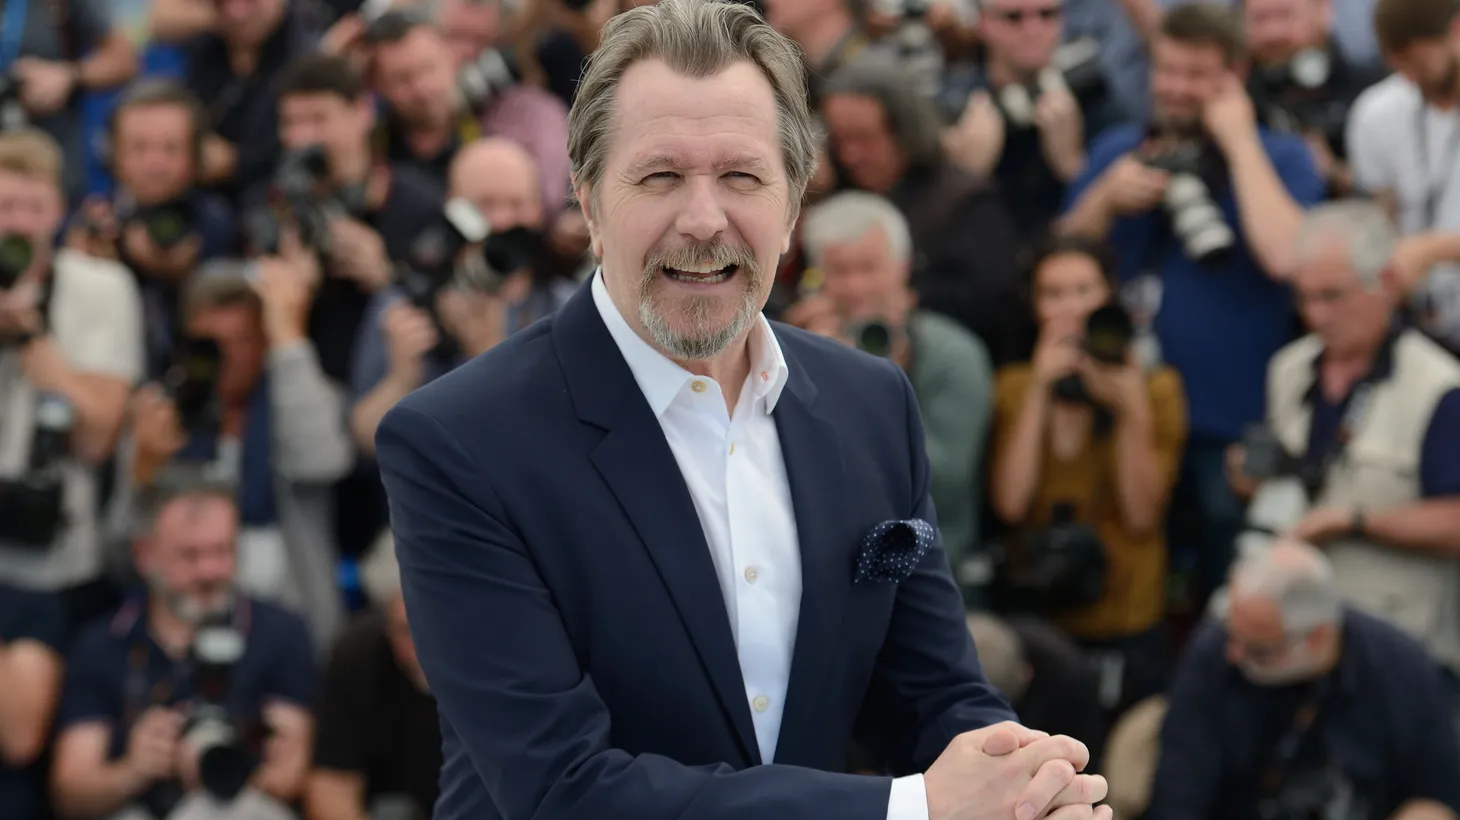 Gary Oldman attending a photocall held at the Palais des Festivals as part of the 71st annual Cannes Film Festival on May 16, 2018 in Cannes, France.